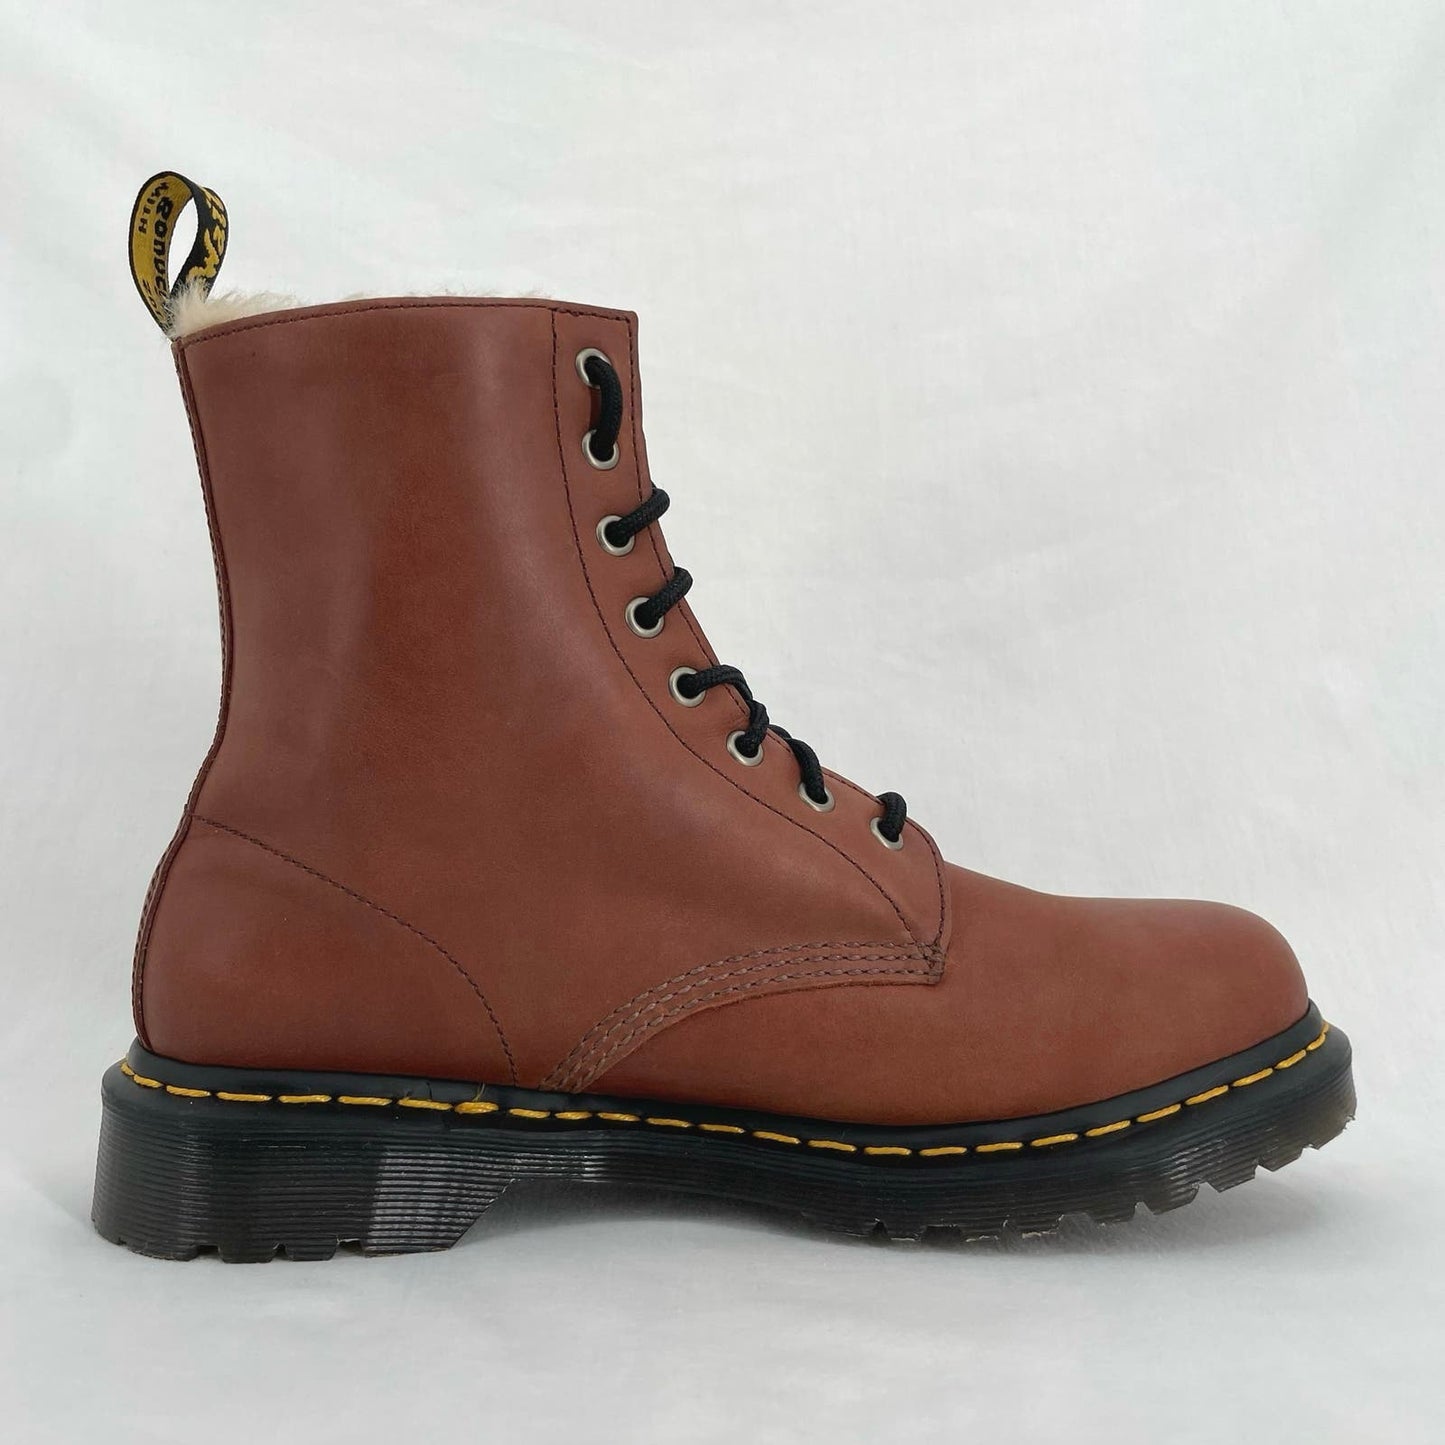 Dr. Martens Serena 1460 Tan Faux Fur Lined Boots Laced Winter Farrier Chalet Size 10